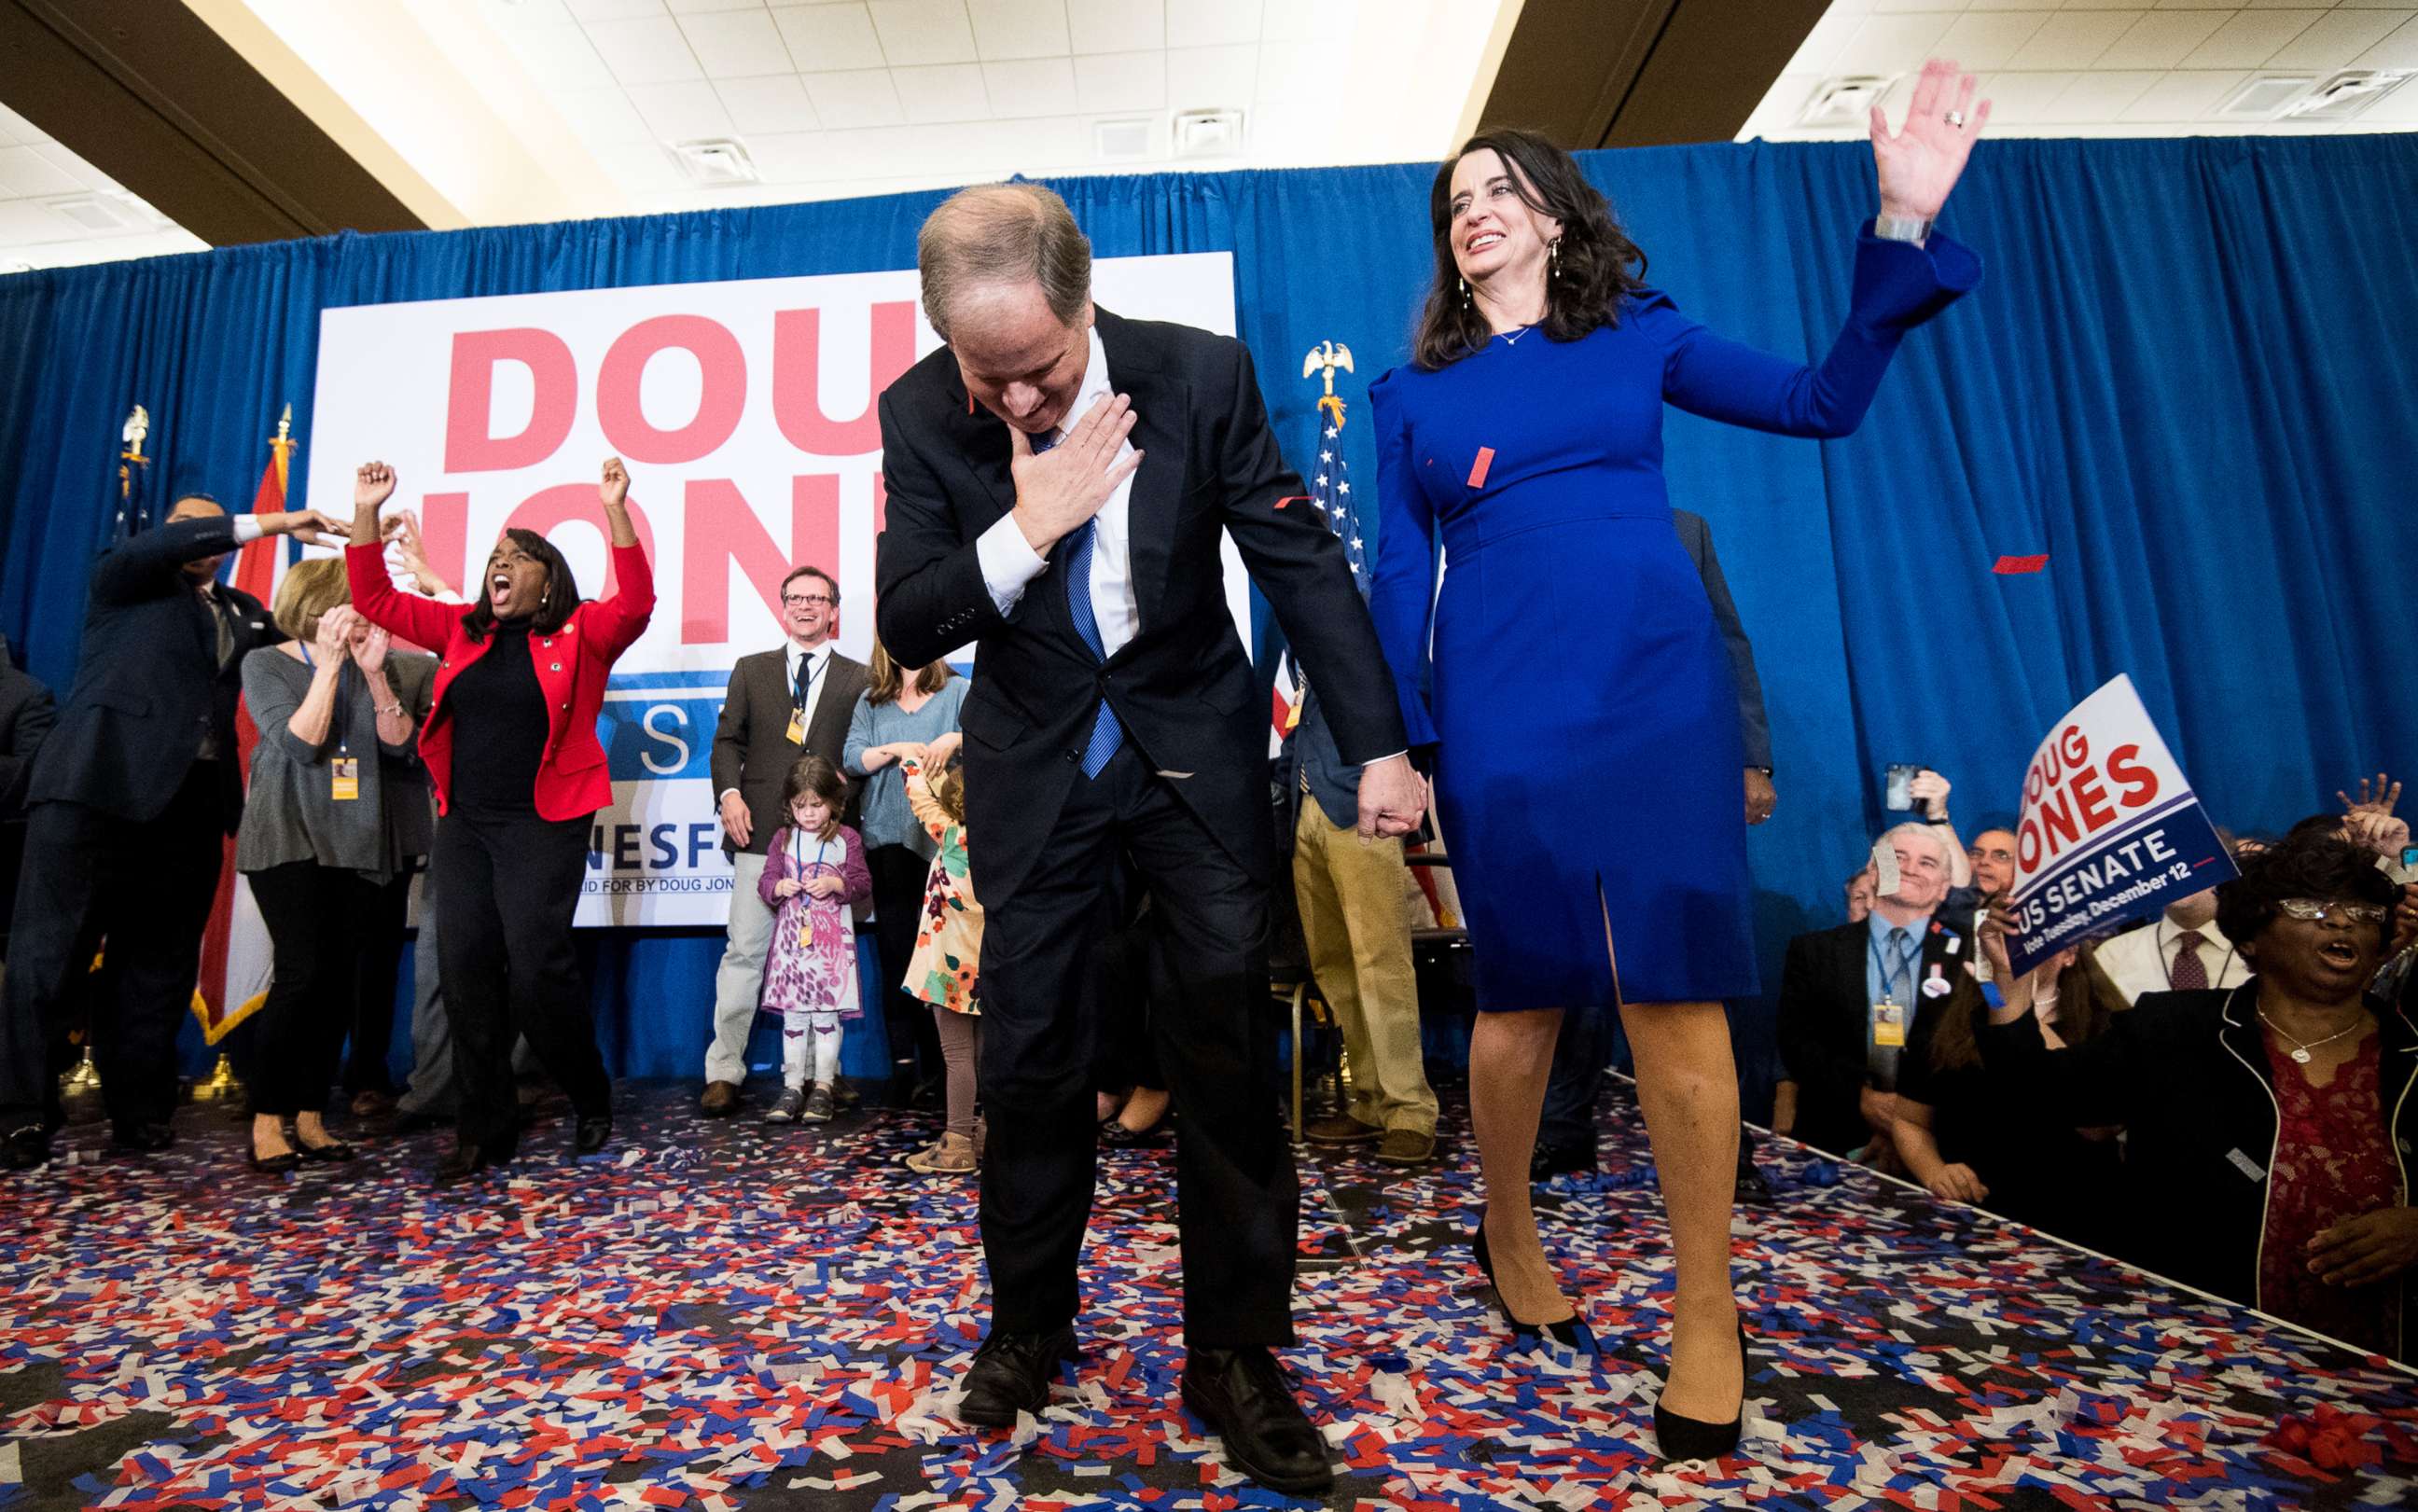 PHOTO: Alabama Senate candidate Doug Jones and his wife celebrate his projected victory over Judge Roy Moore at the Sheraton in Birmingham, Ala., Dec. 12, 2017.